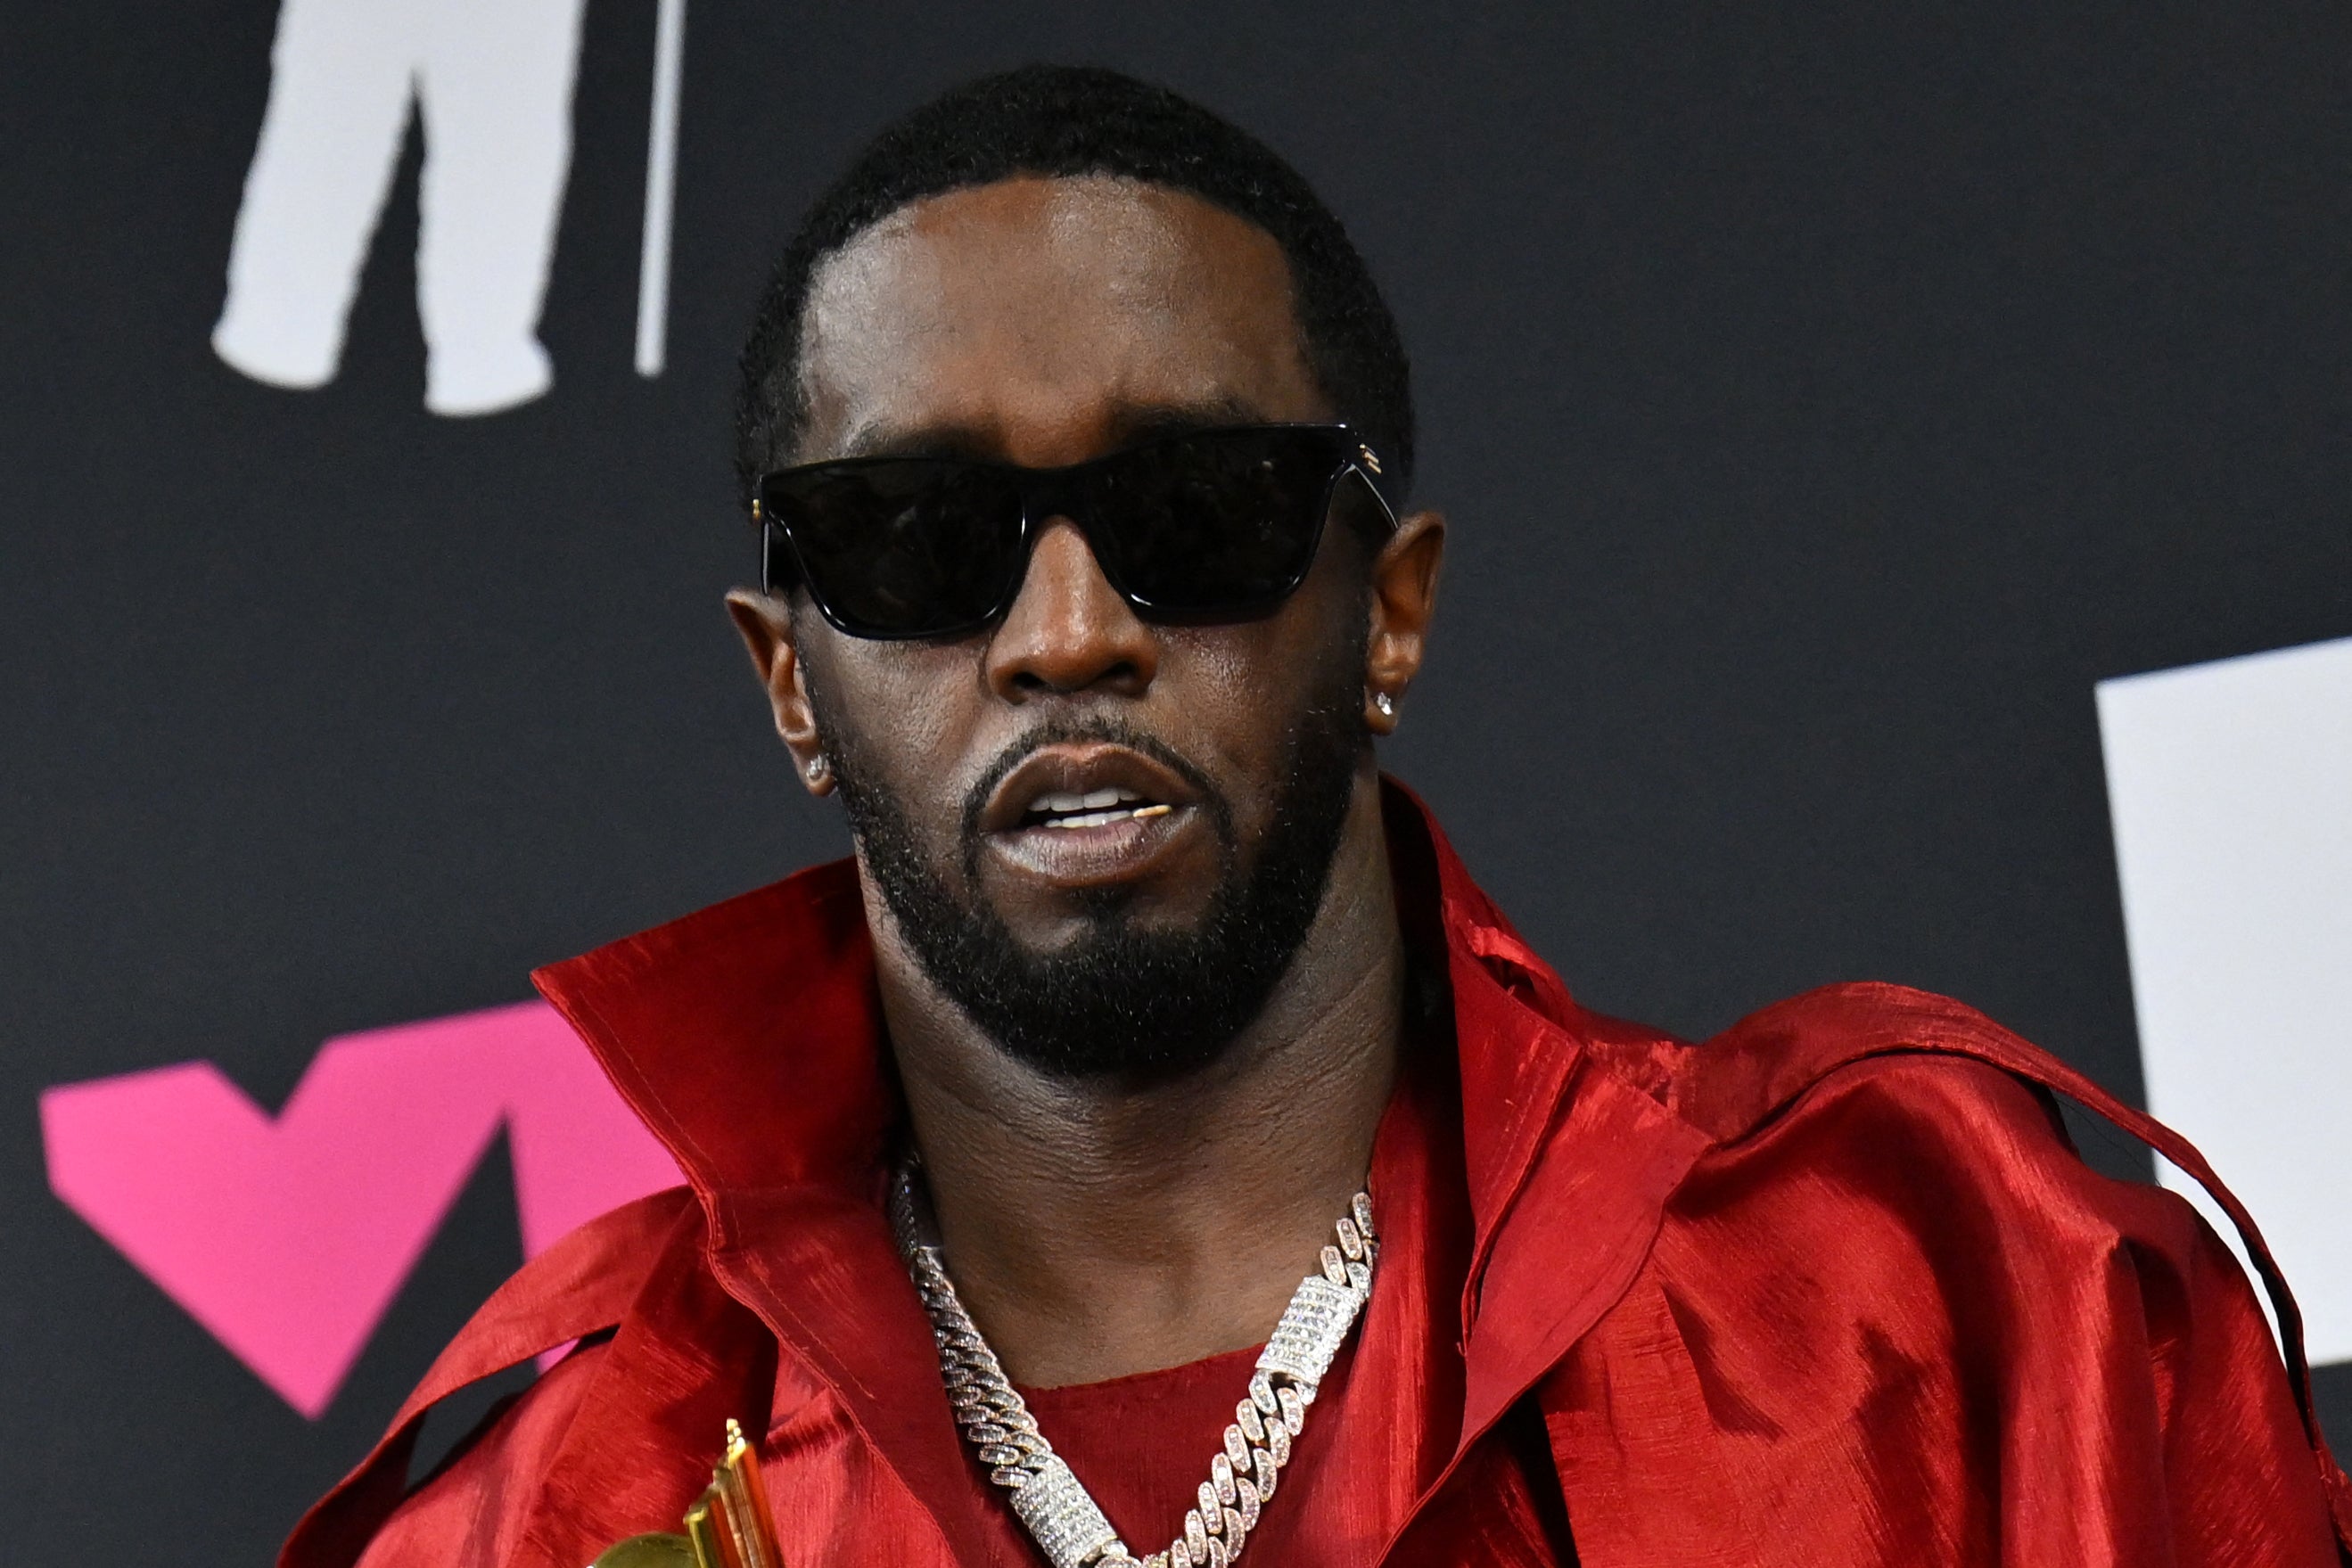 Sean ‘Diddy’ Combs faces several allegations of sexual abuse. The famed rapper has denied all wrongdoing